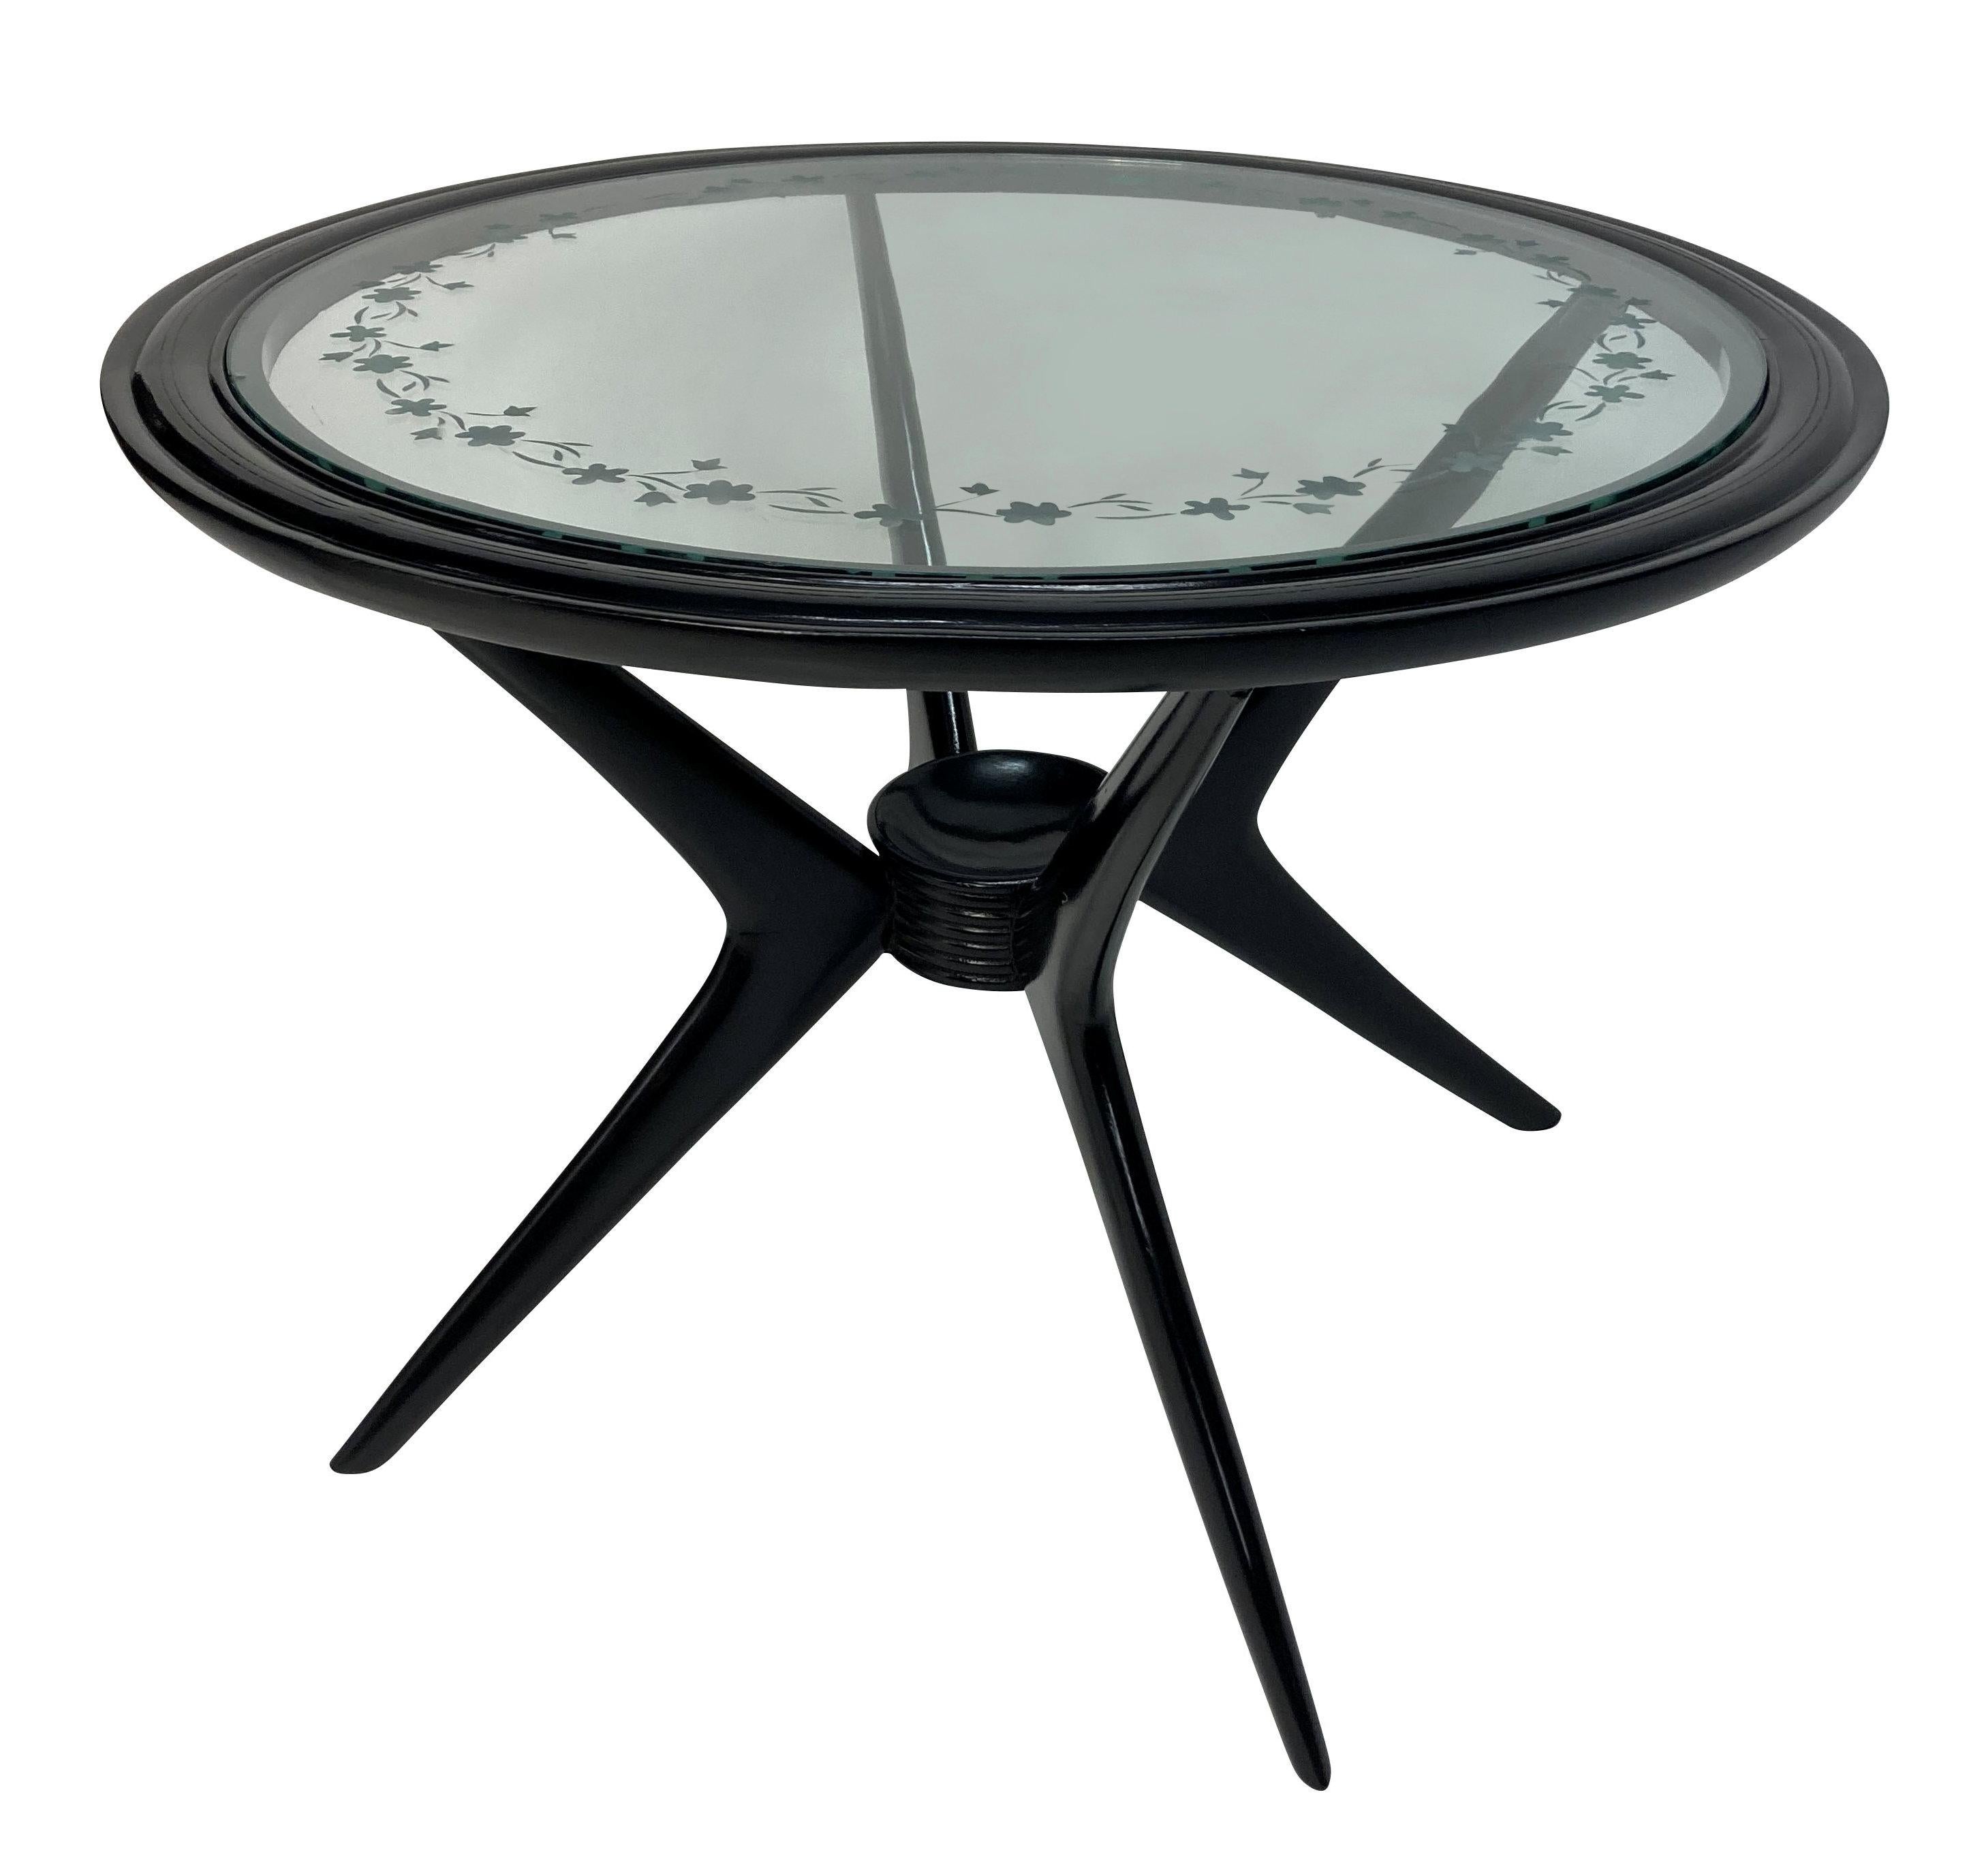 Mid-20th Century Italian Circular Occasional Table by Cassina For Sale